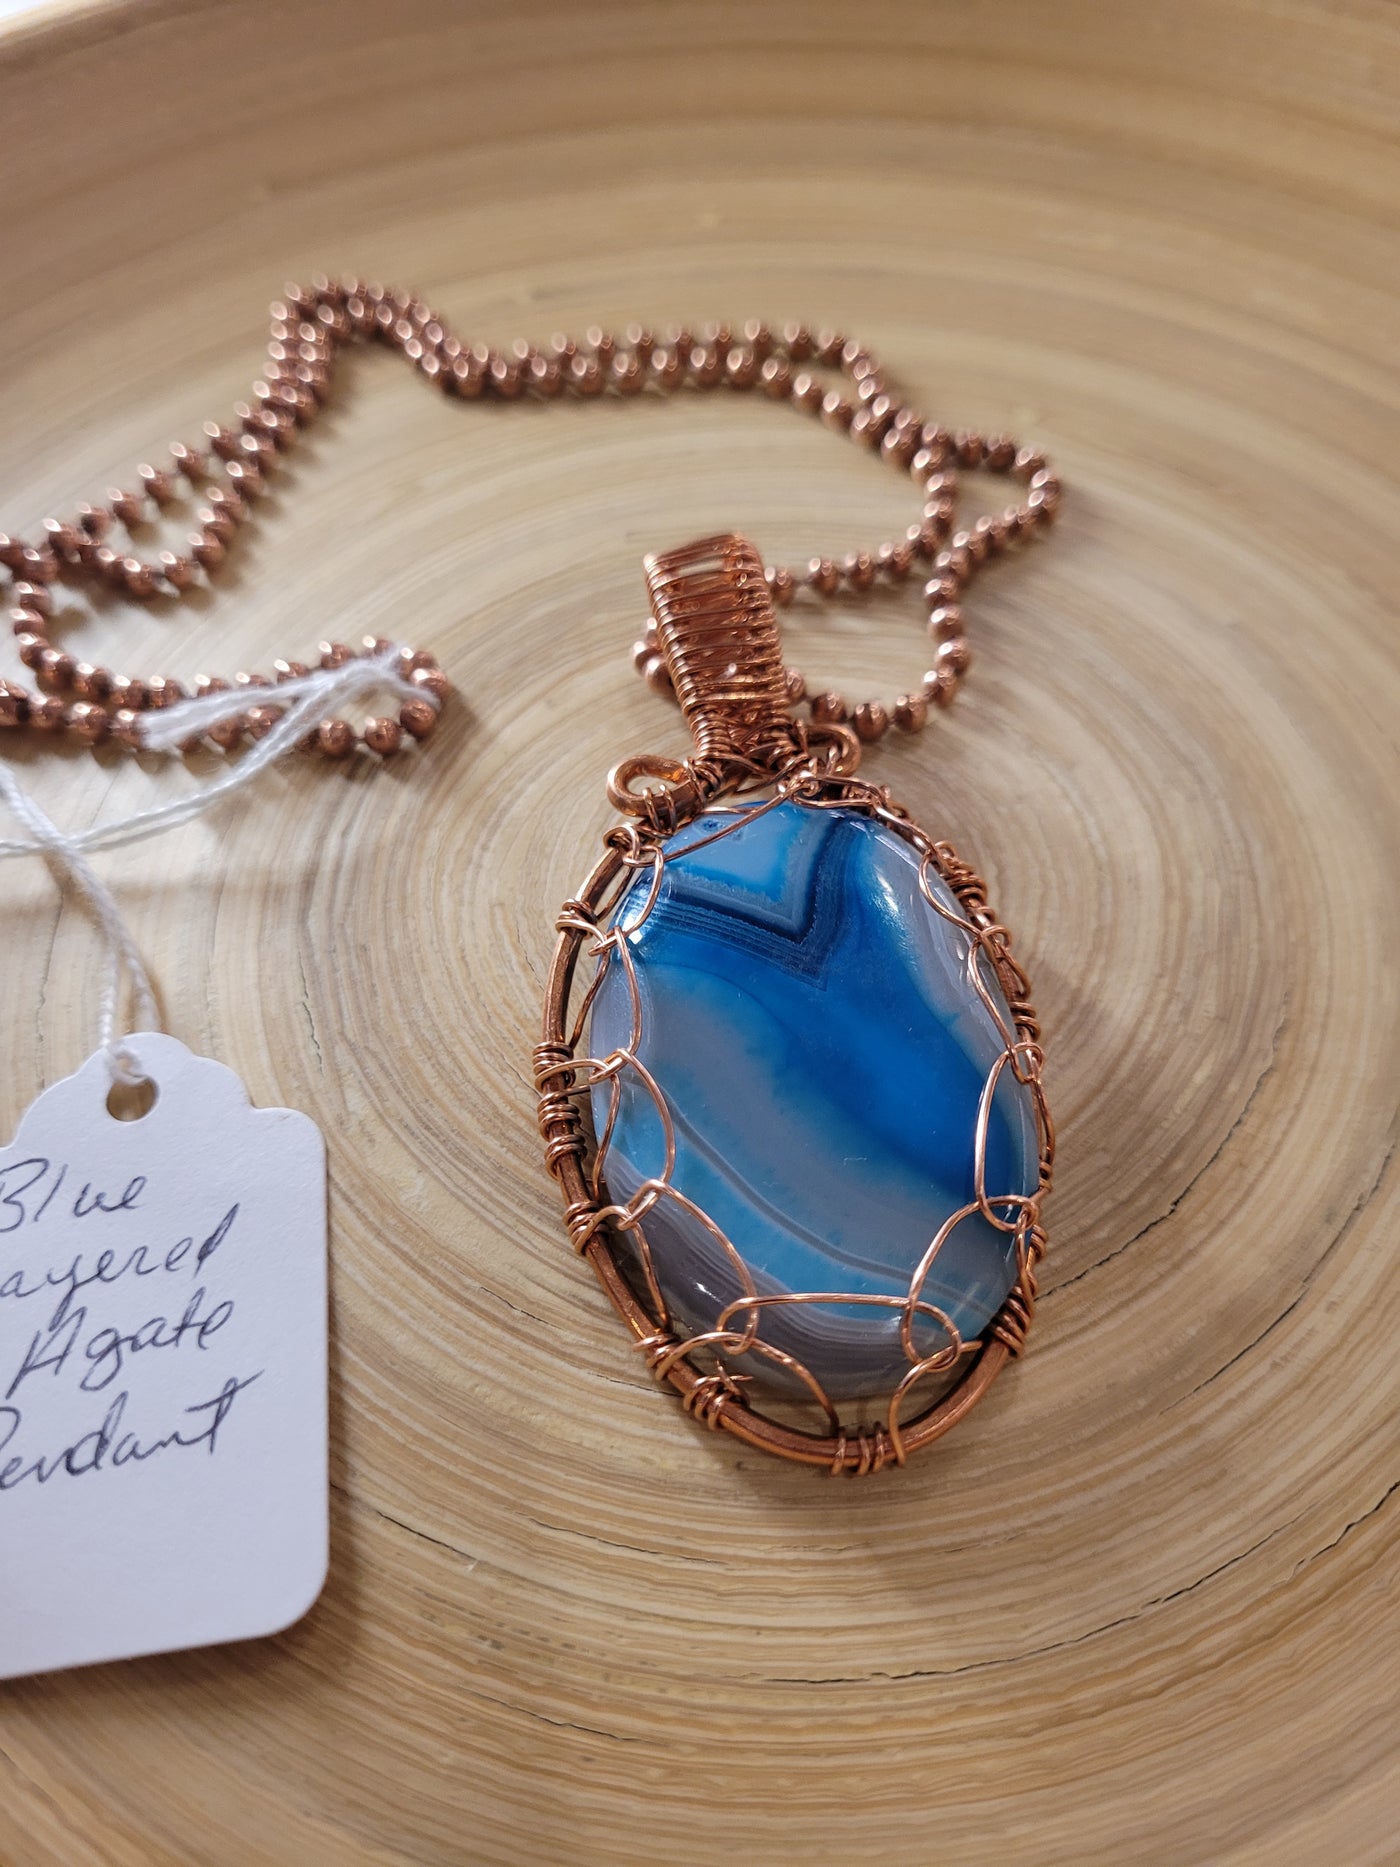 Blue Layered Agate Pendant Necklace by TRMC